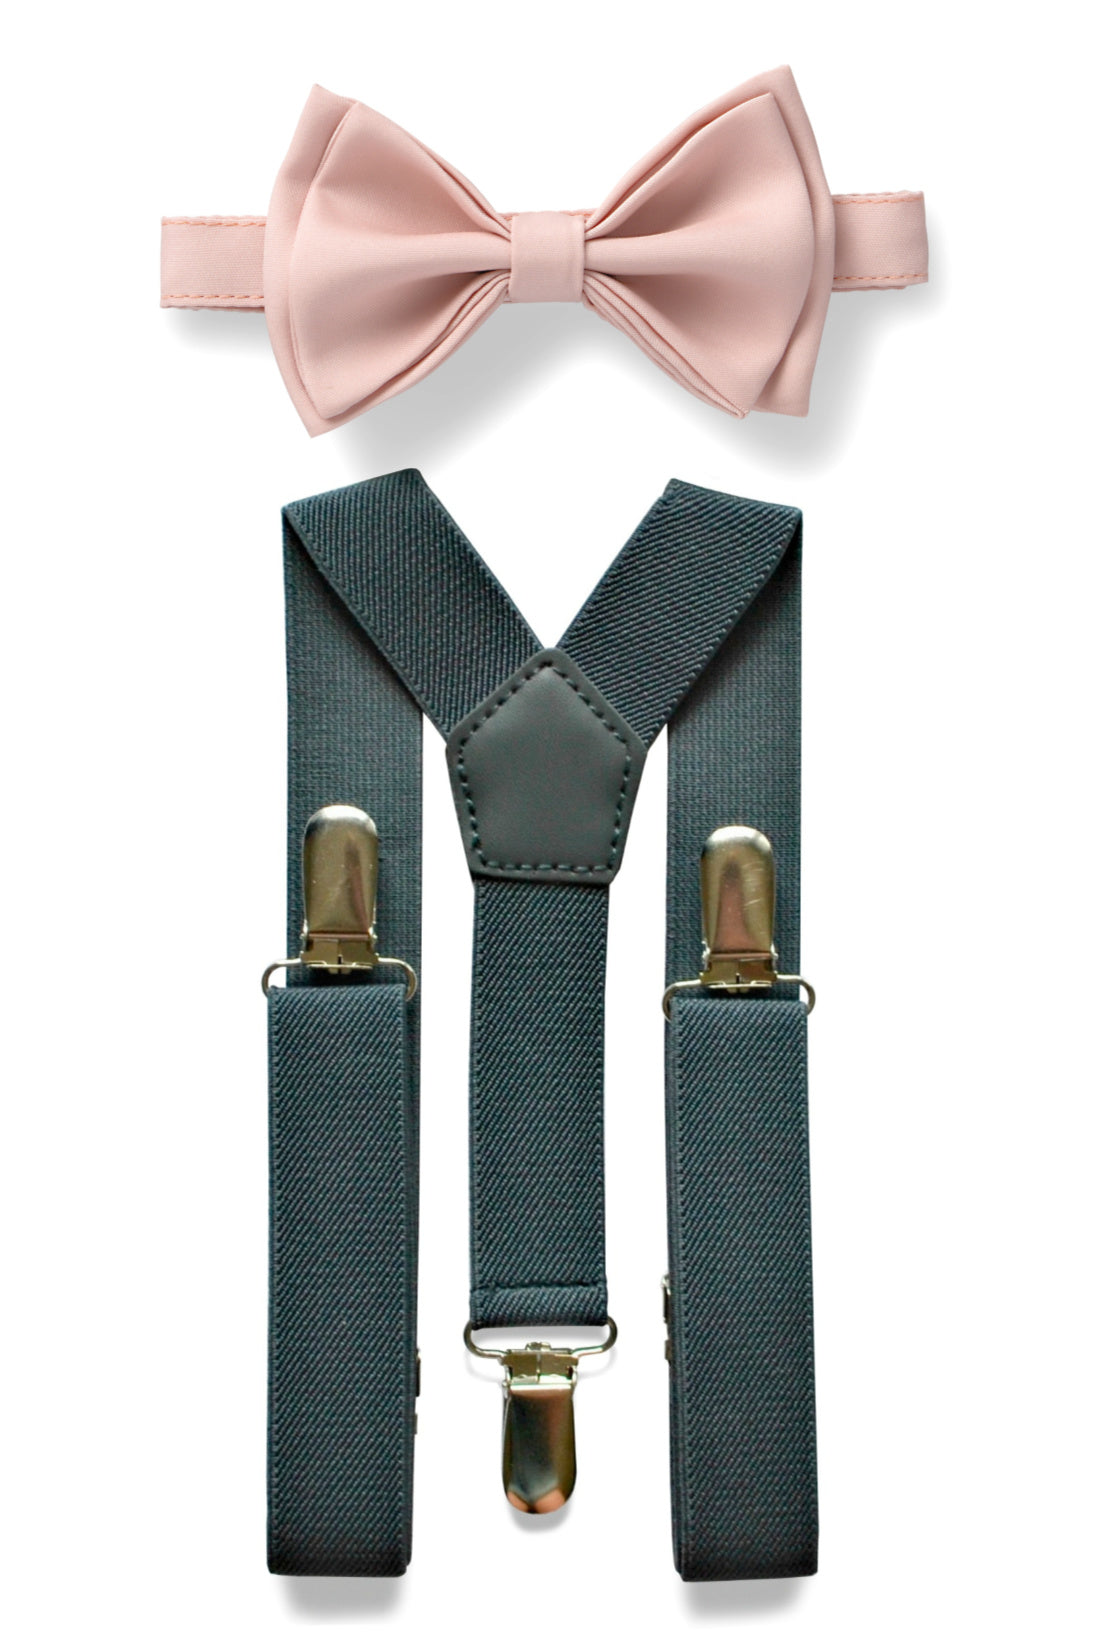 Charcoal Grey Suspenders & Blush Bow Tie